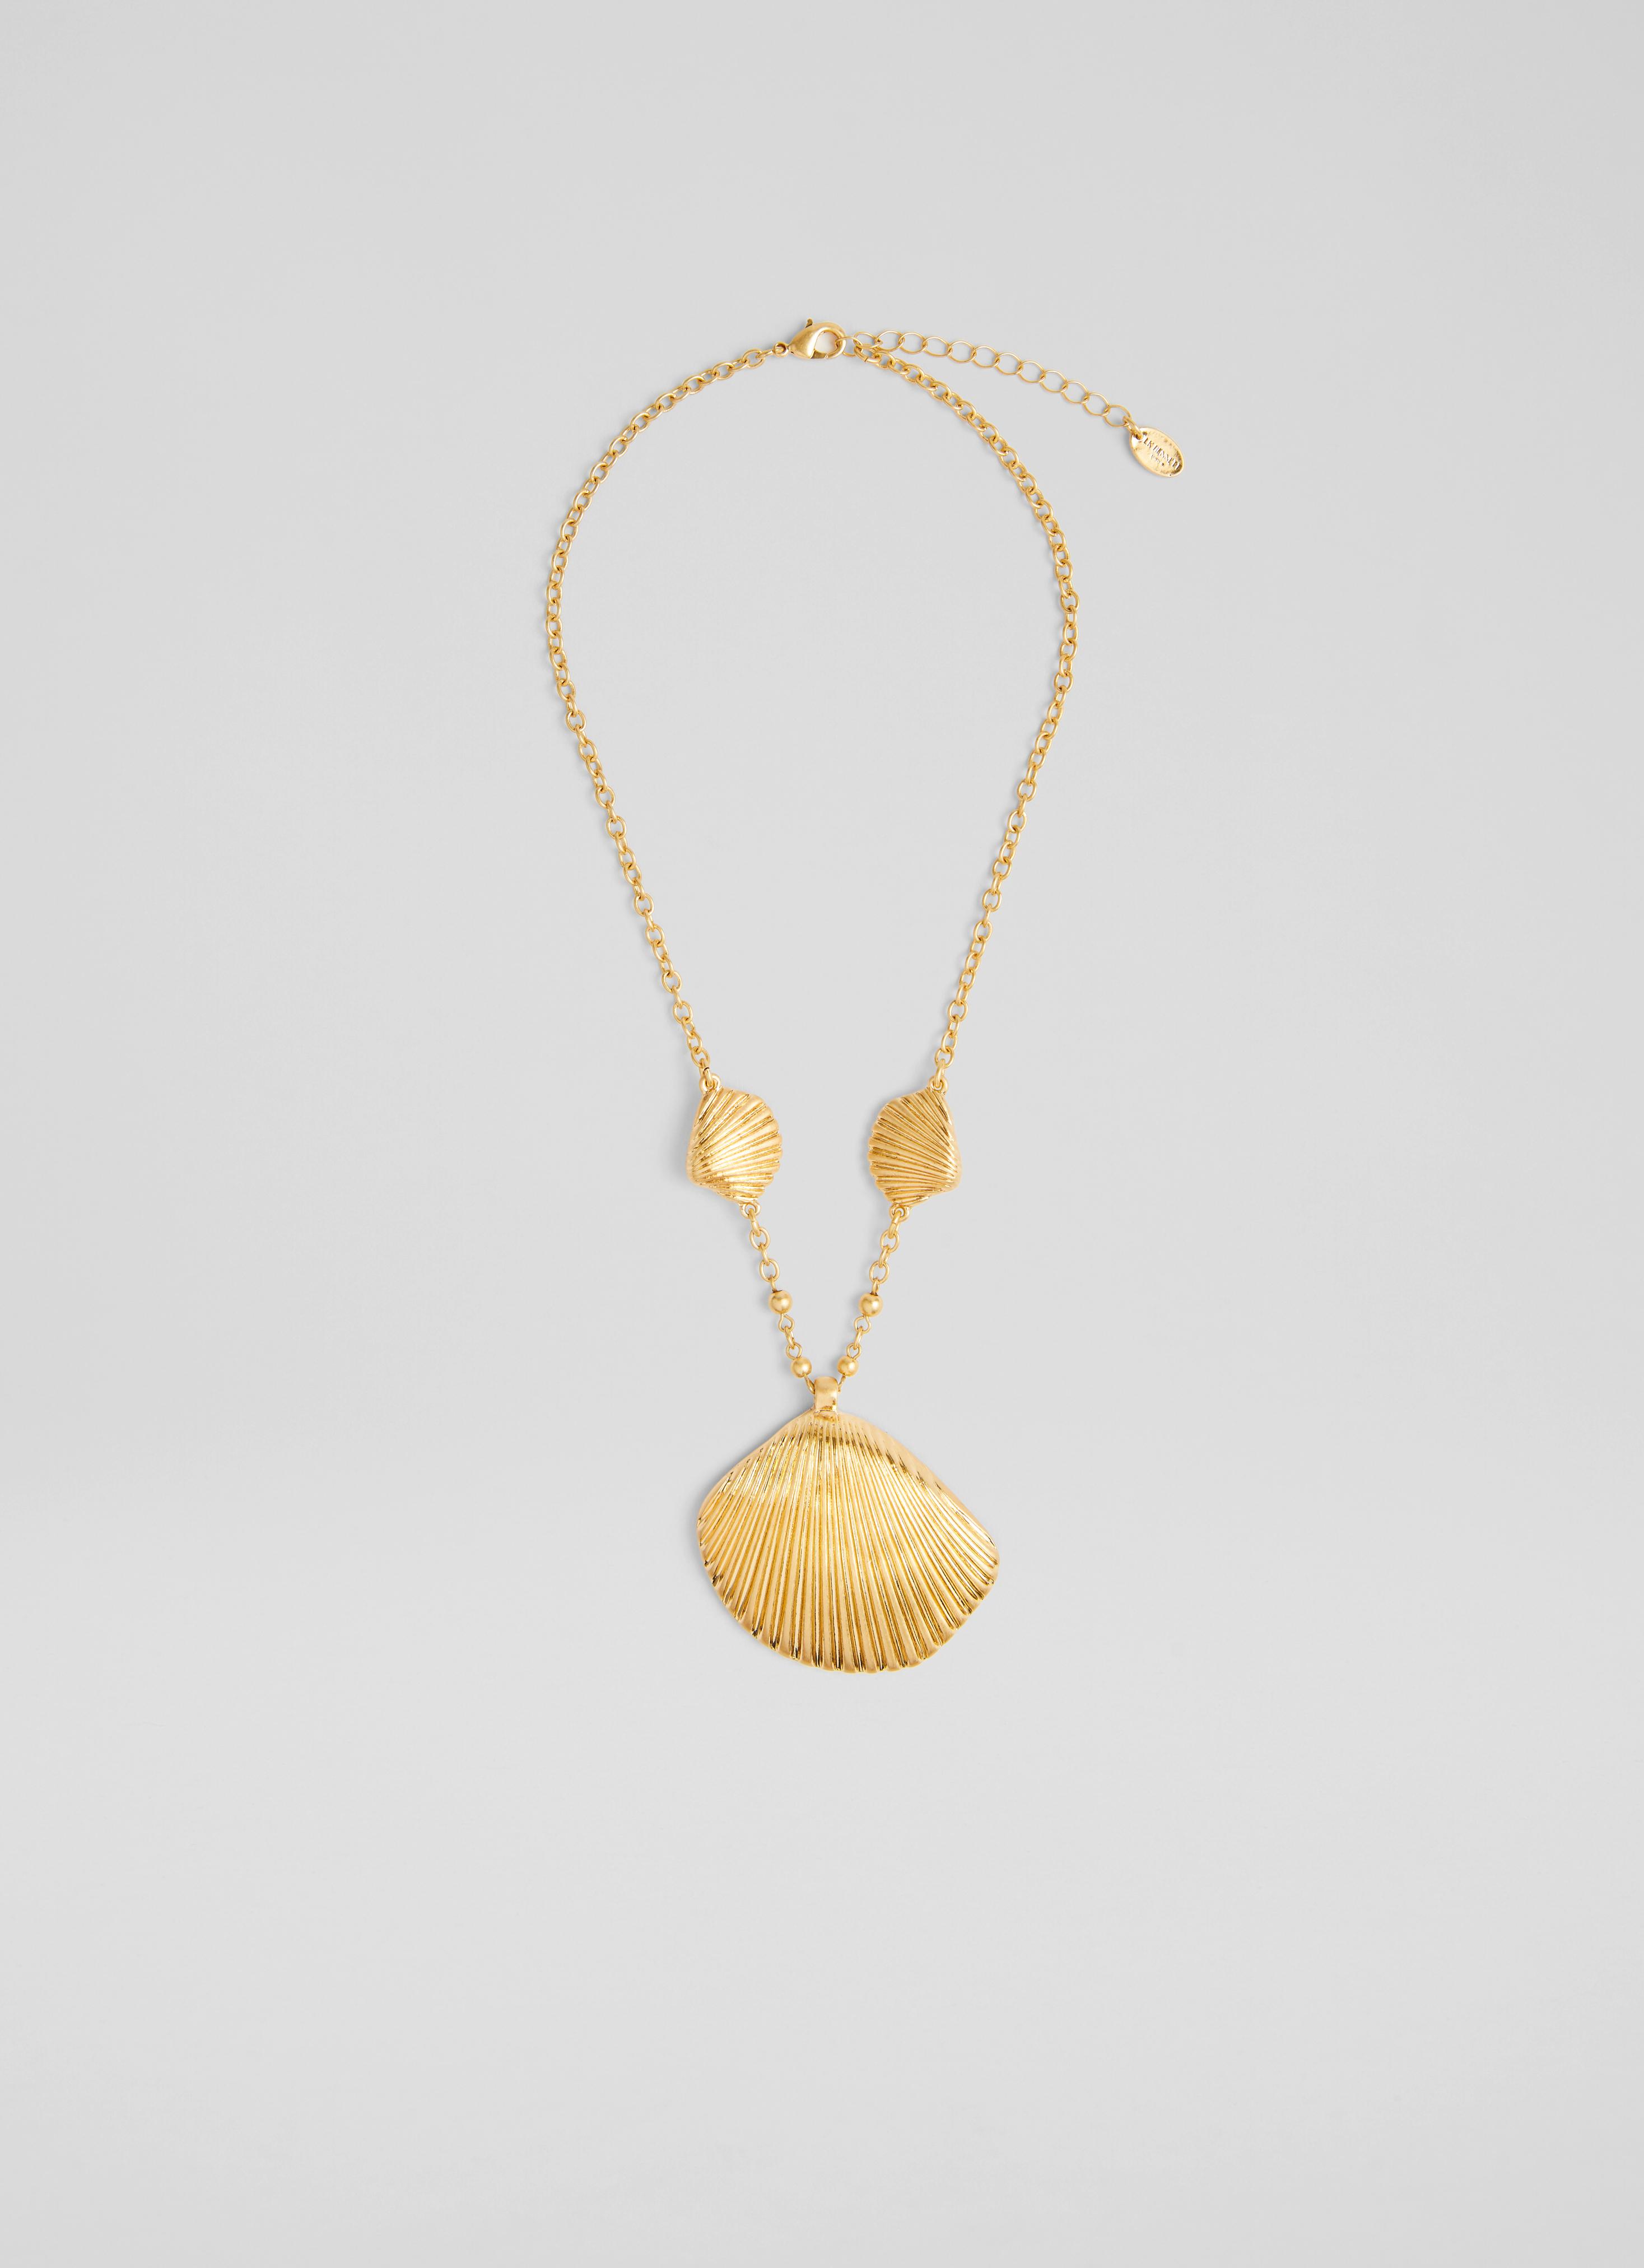 L.K.Bennett Coral Gold-Tone Shell Necklace, Cream Gold